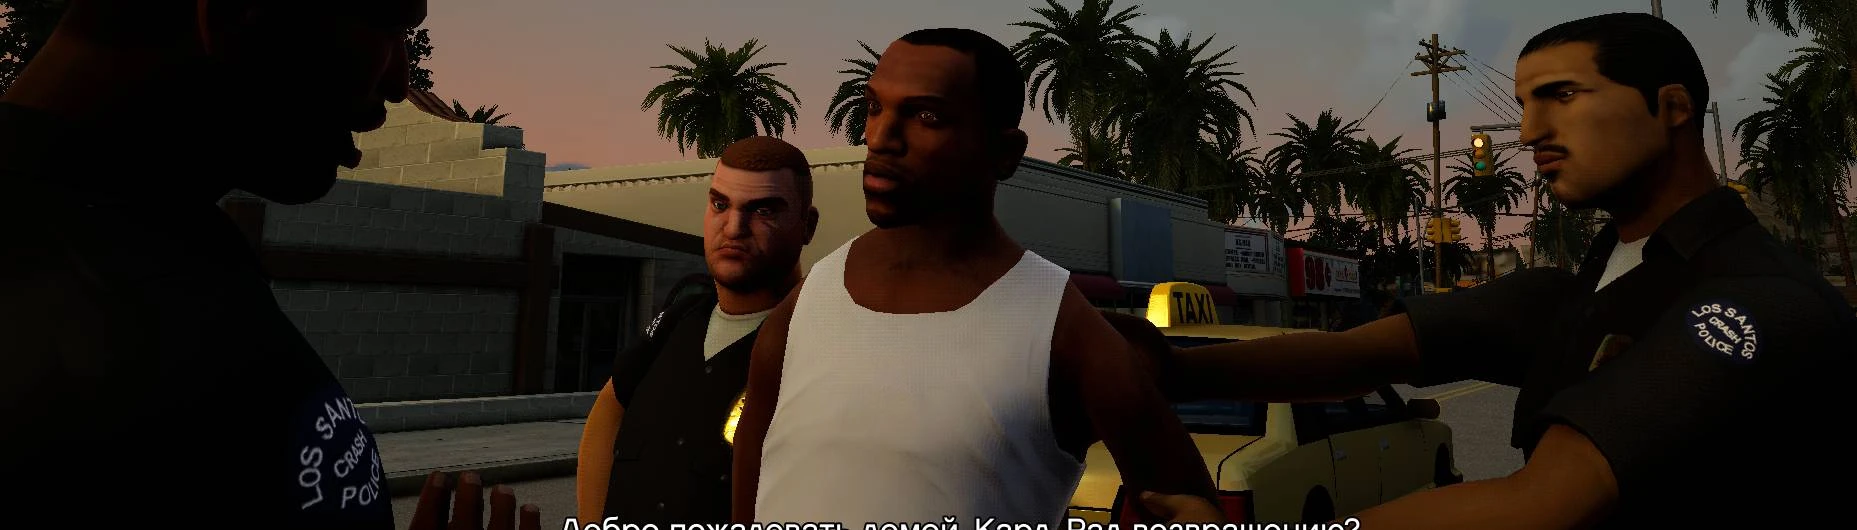 Grand Theft Auto: San Andreas RE-REVIEW - ColourShed 